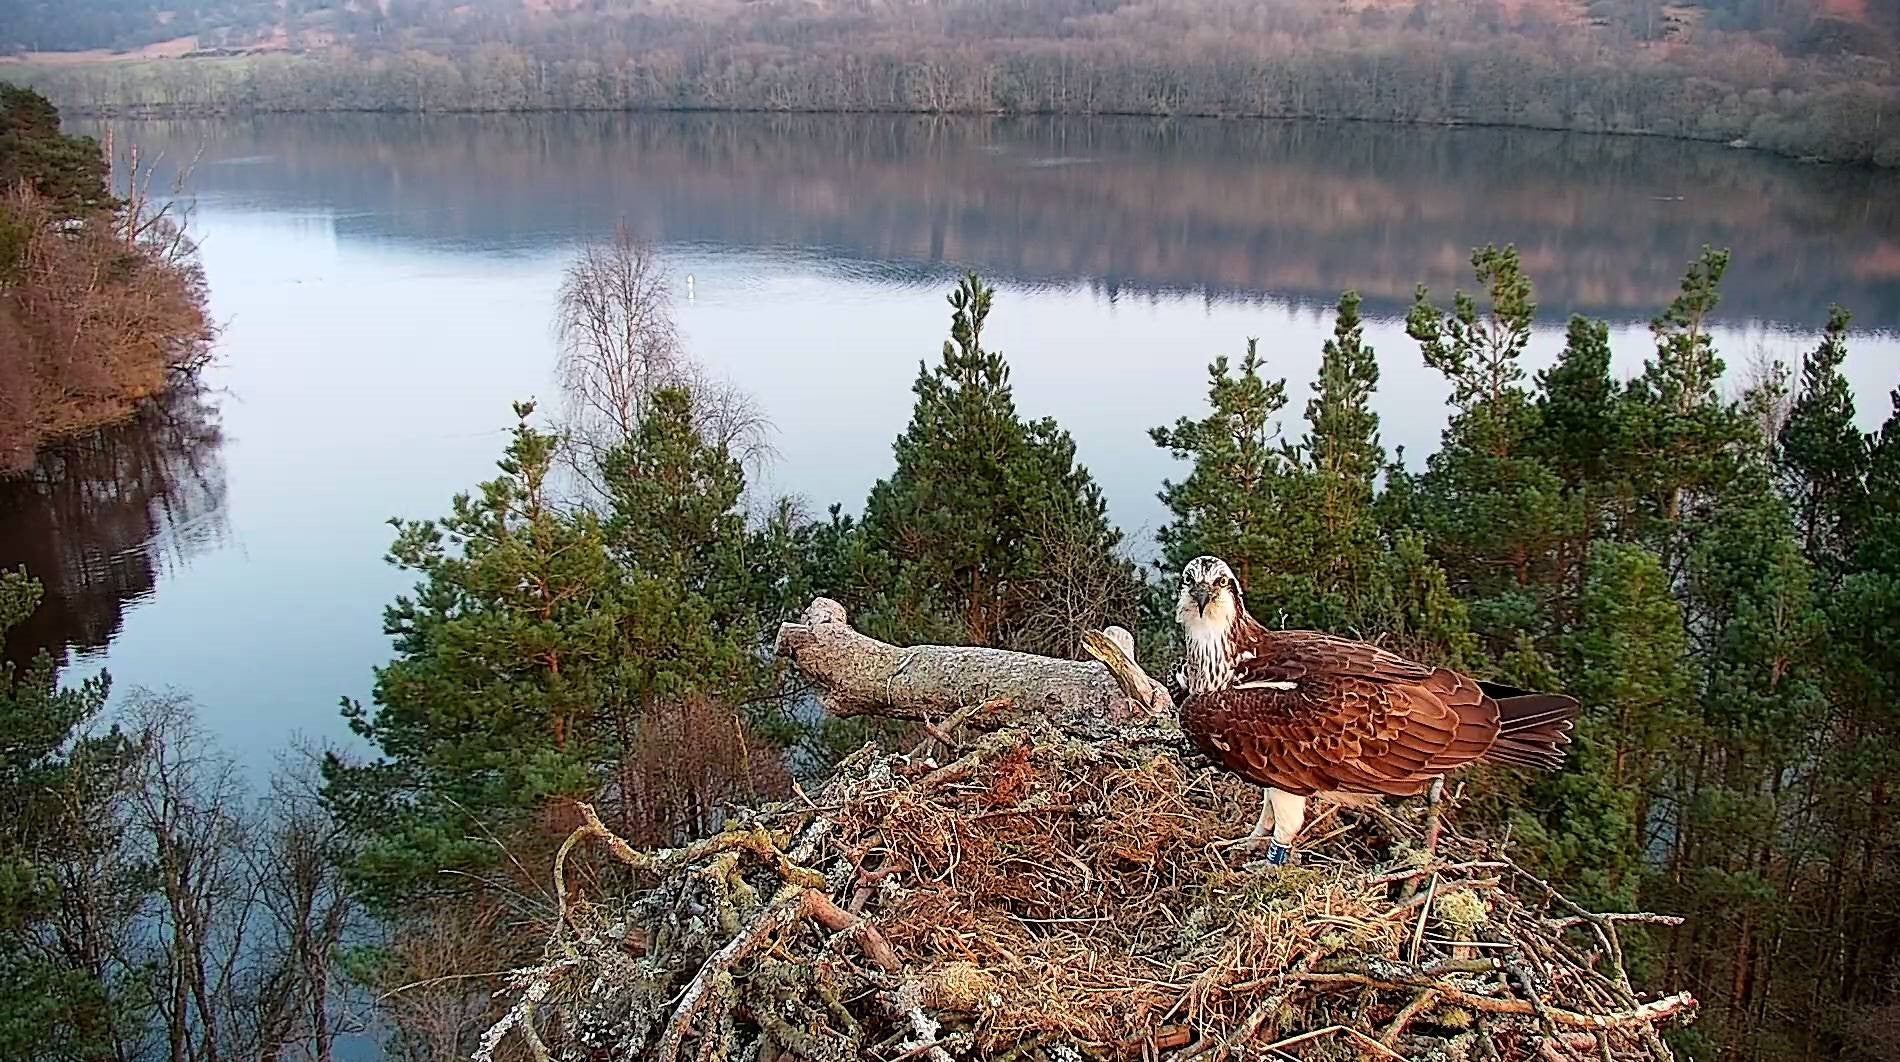 Female osprey NC0 on her nest at Loch of the Lowes wildlife reserve